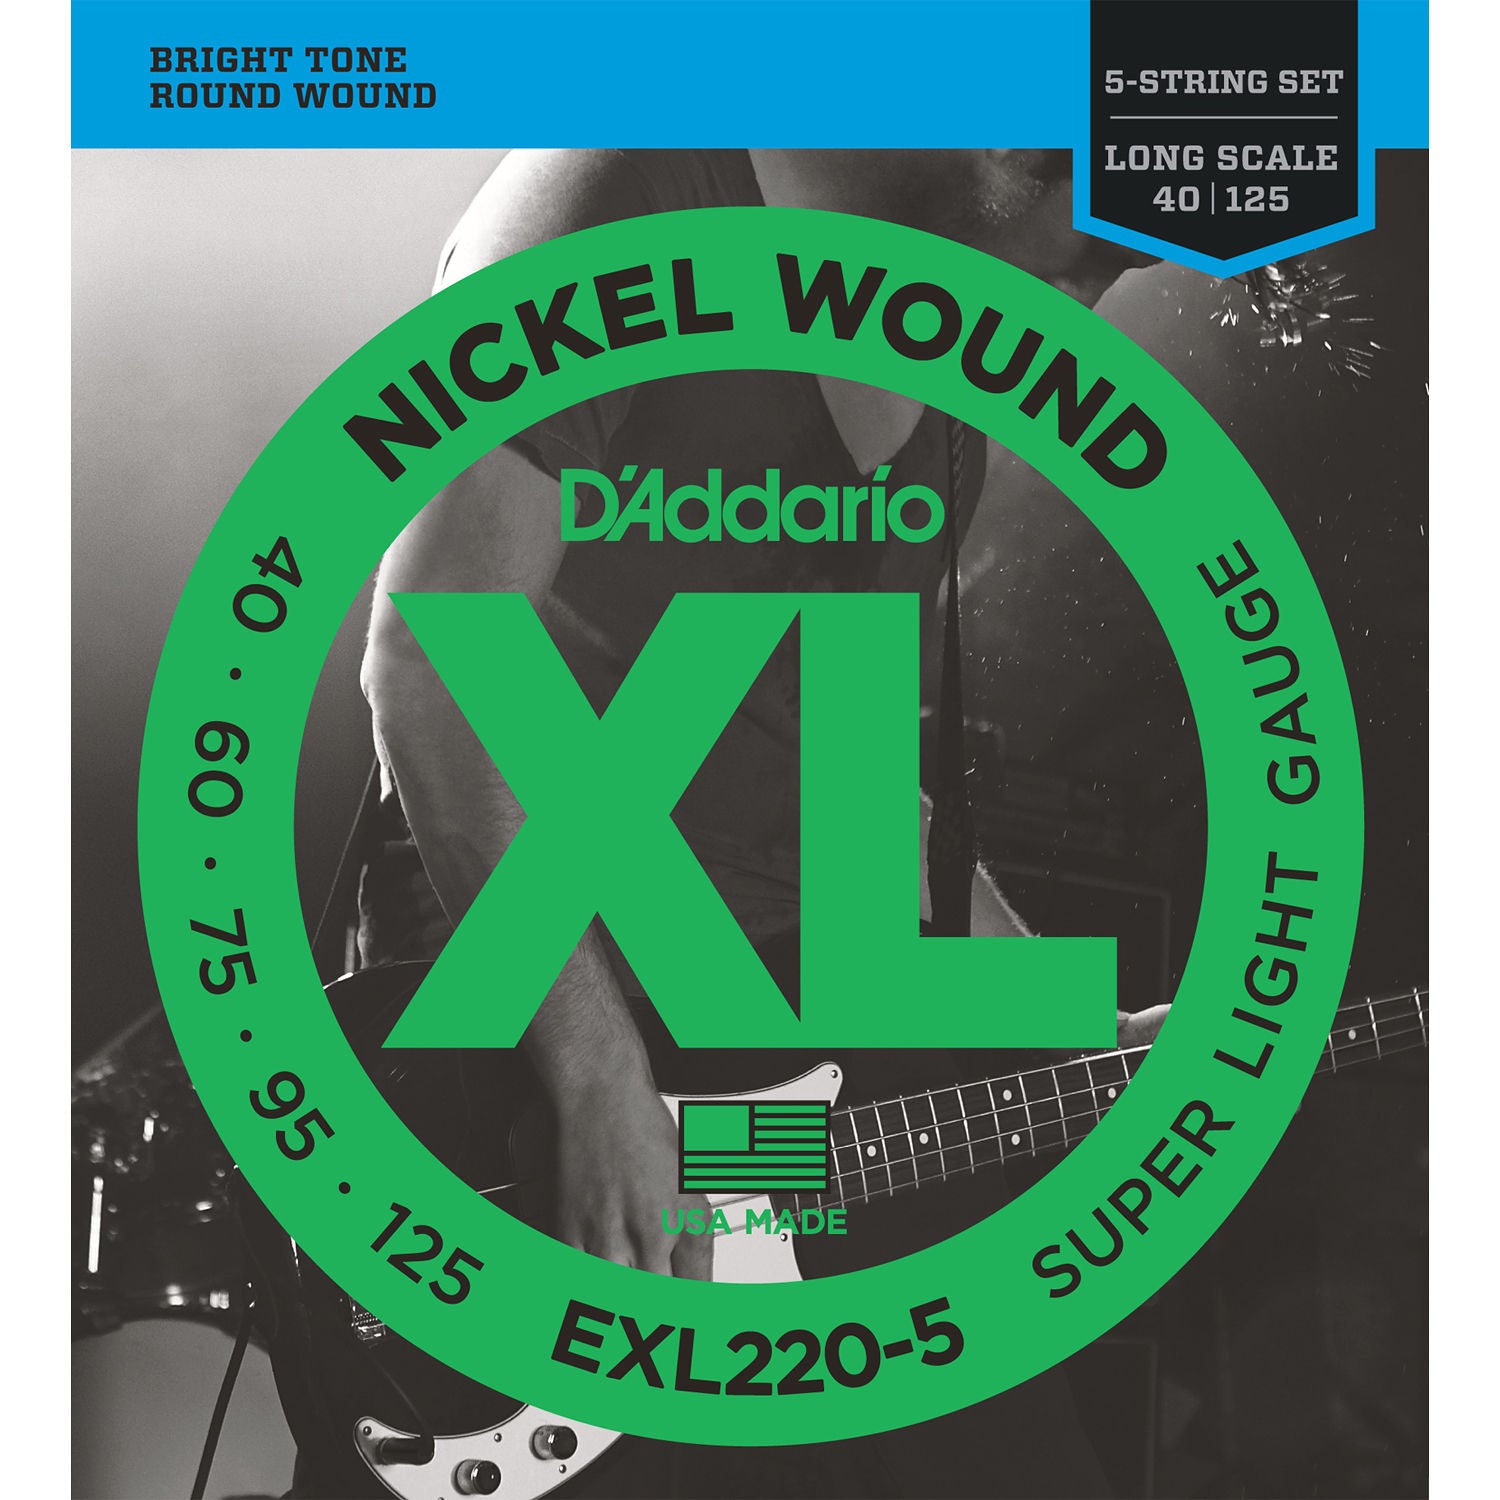 D'Addario EXL220-5 Super Light XL Nickel Wound Electric Bass Strings Long Scale